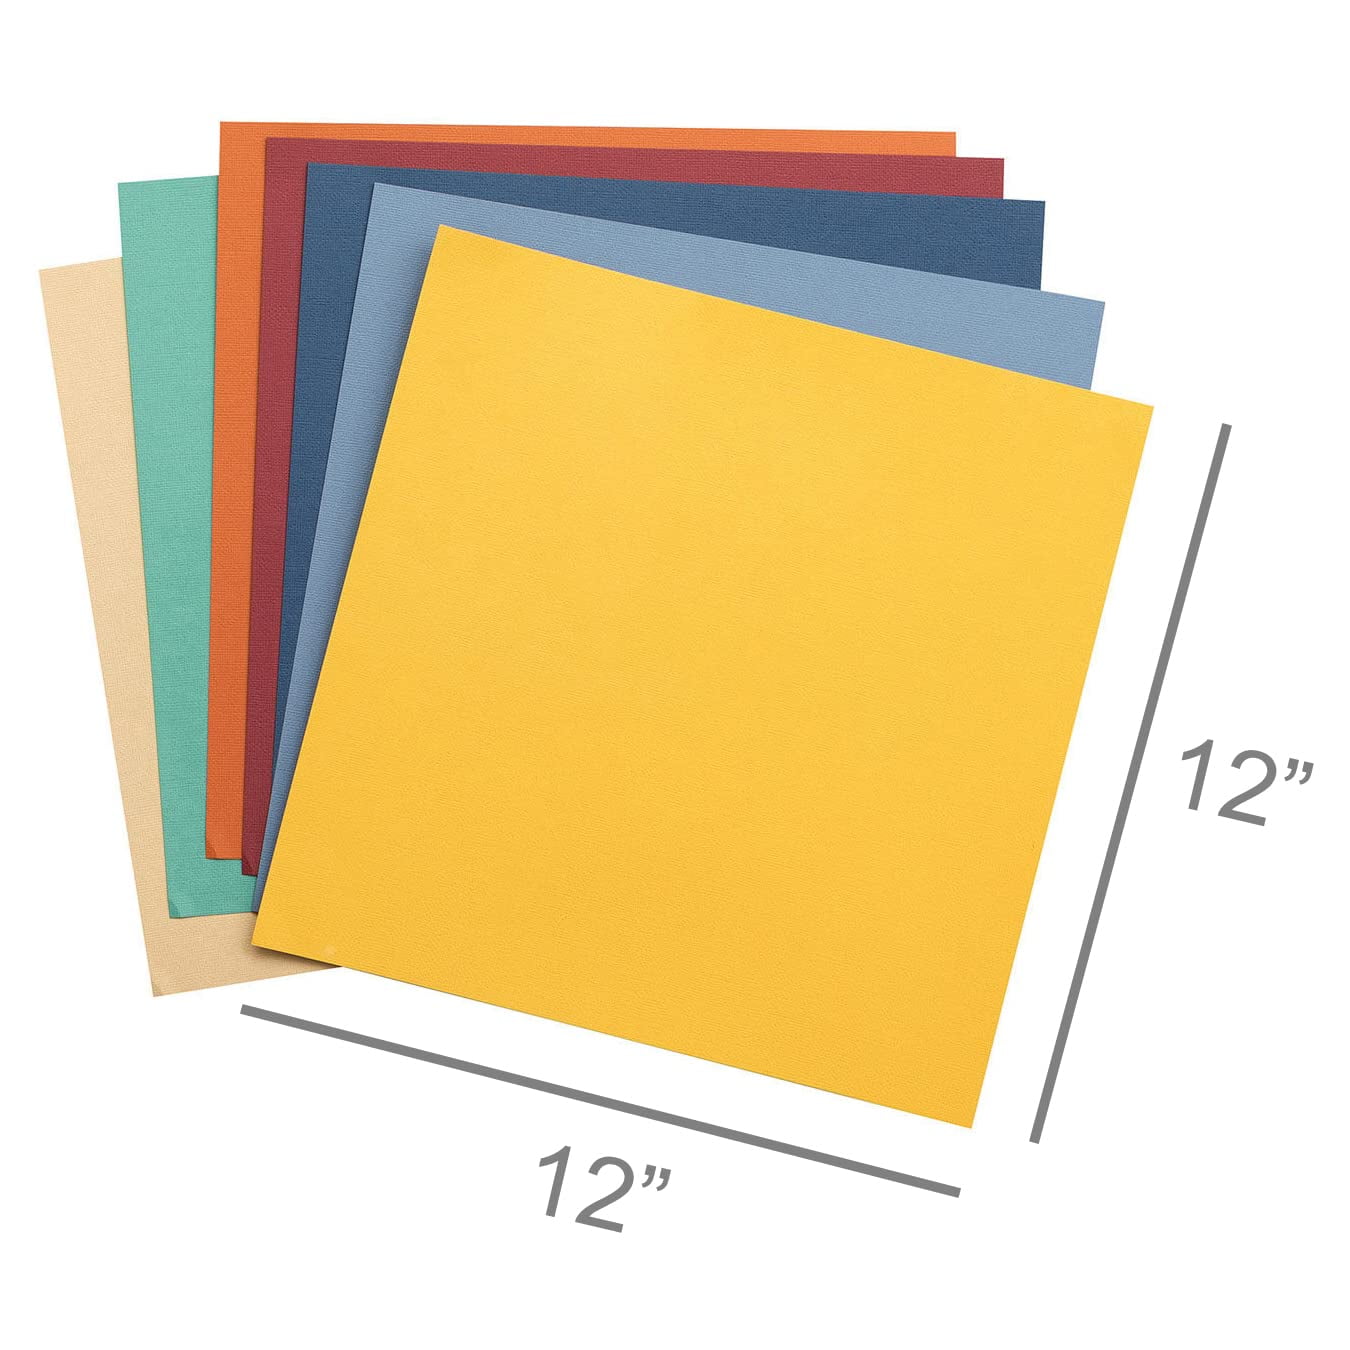 48 Sheets 12x12 Solid Core Colorful Cardstock Textured 85Lb Multi Colored  Card Stock Paper 16 Assorted Colors for Cricut Card Making